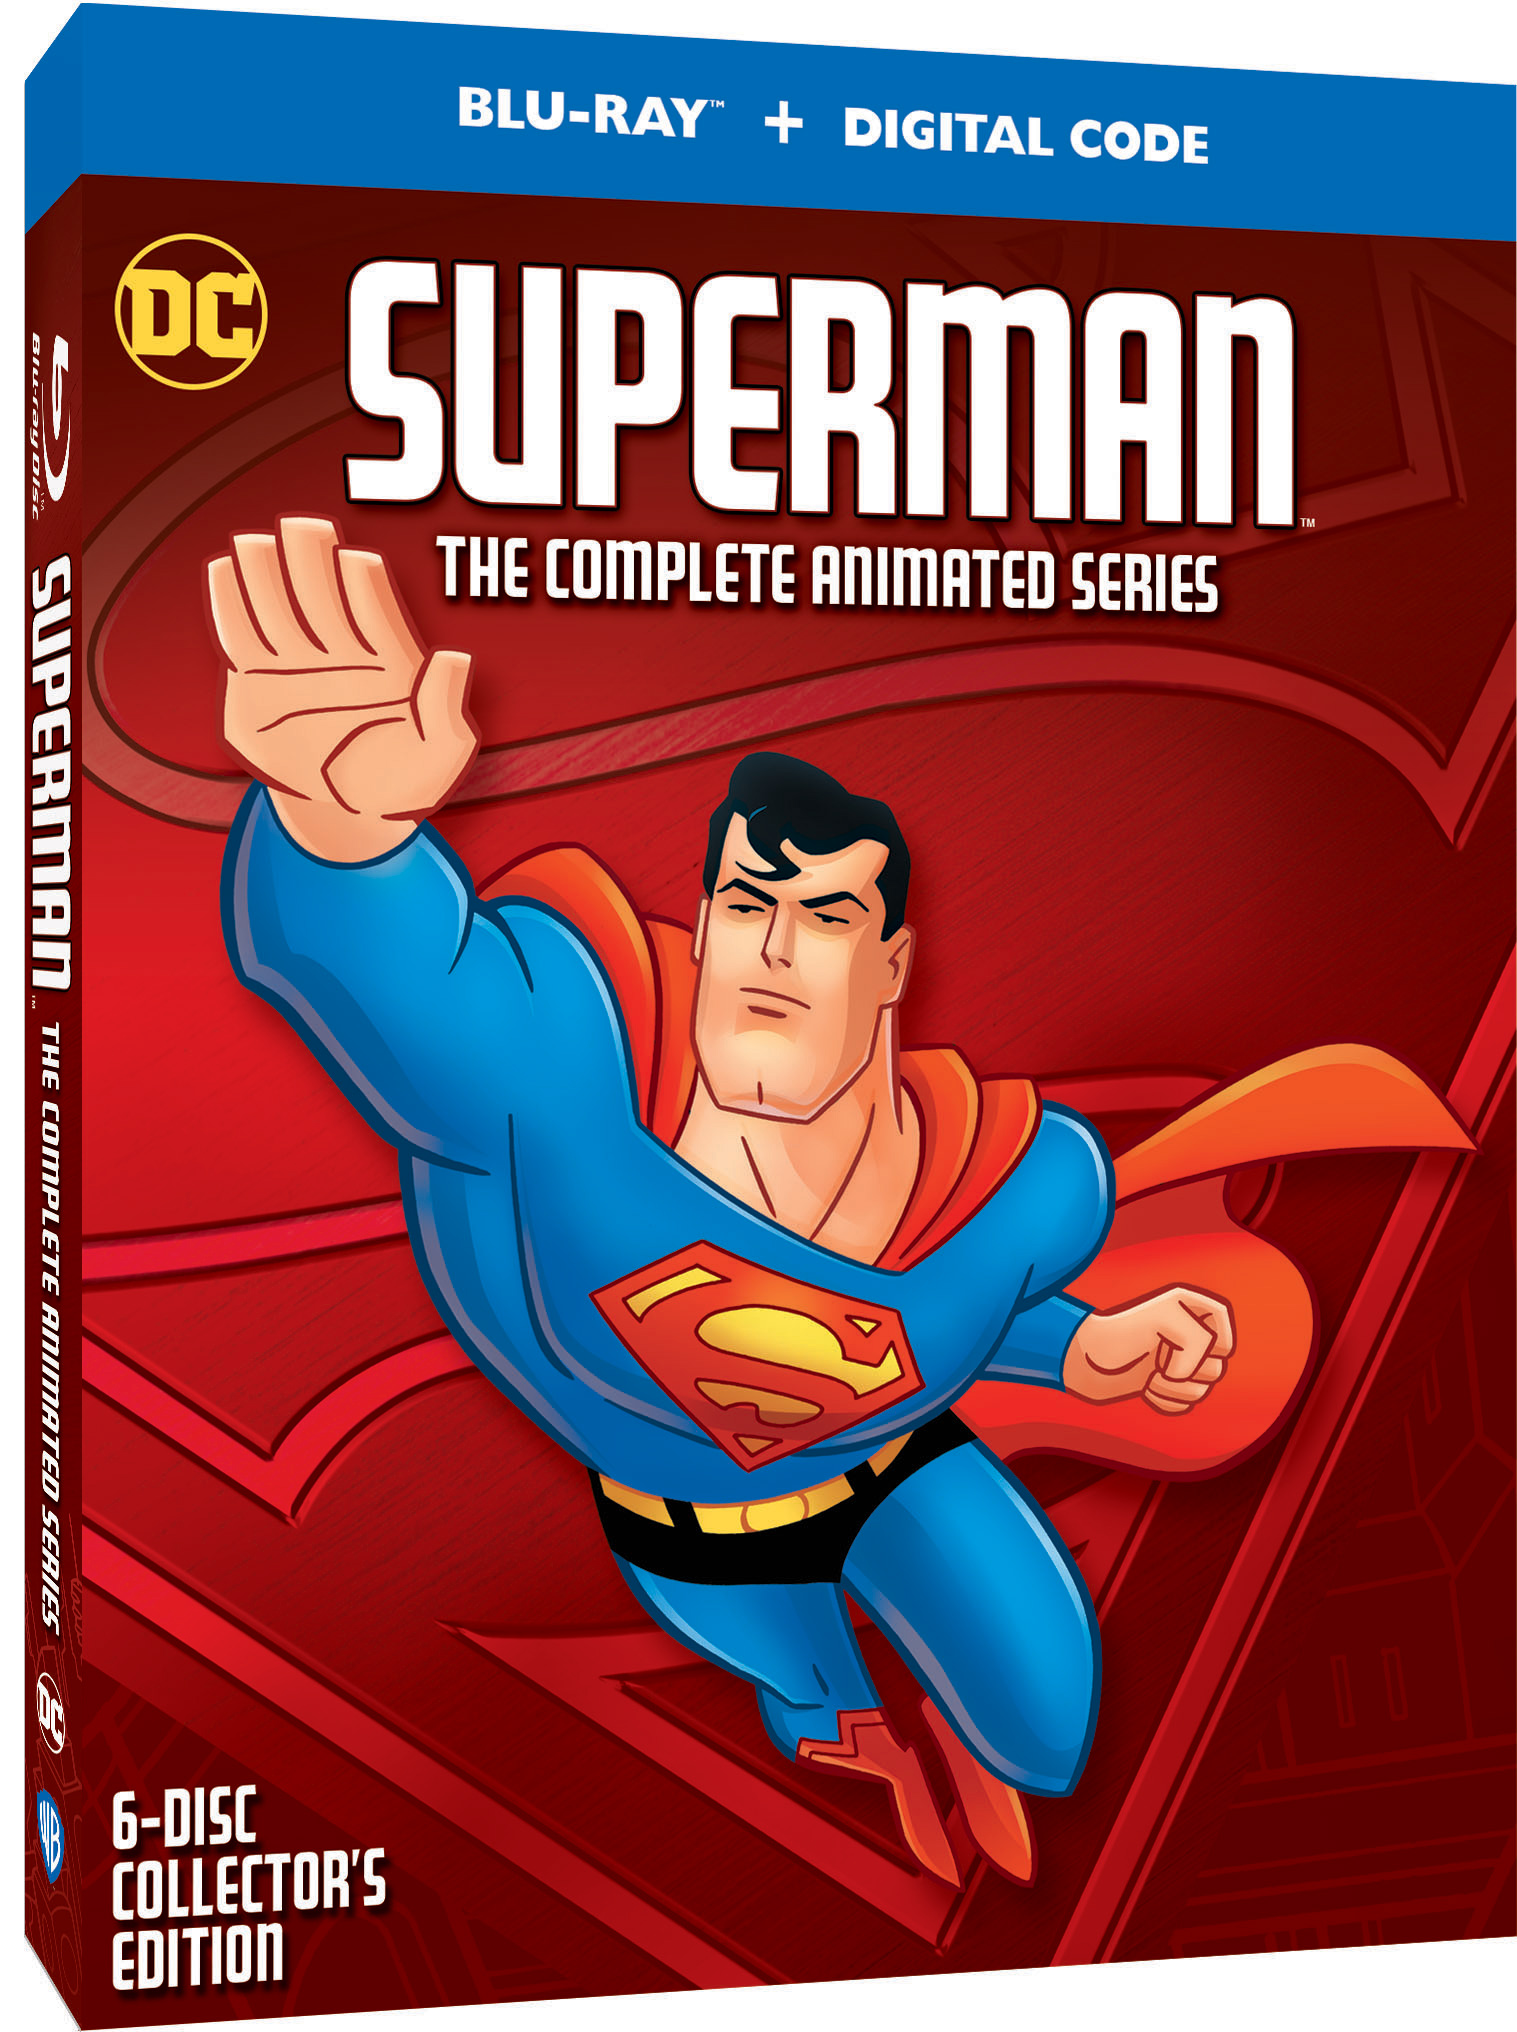 Superman: The Animated Series Comes To Blu-ray | FlickDirect